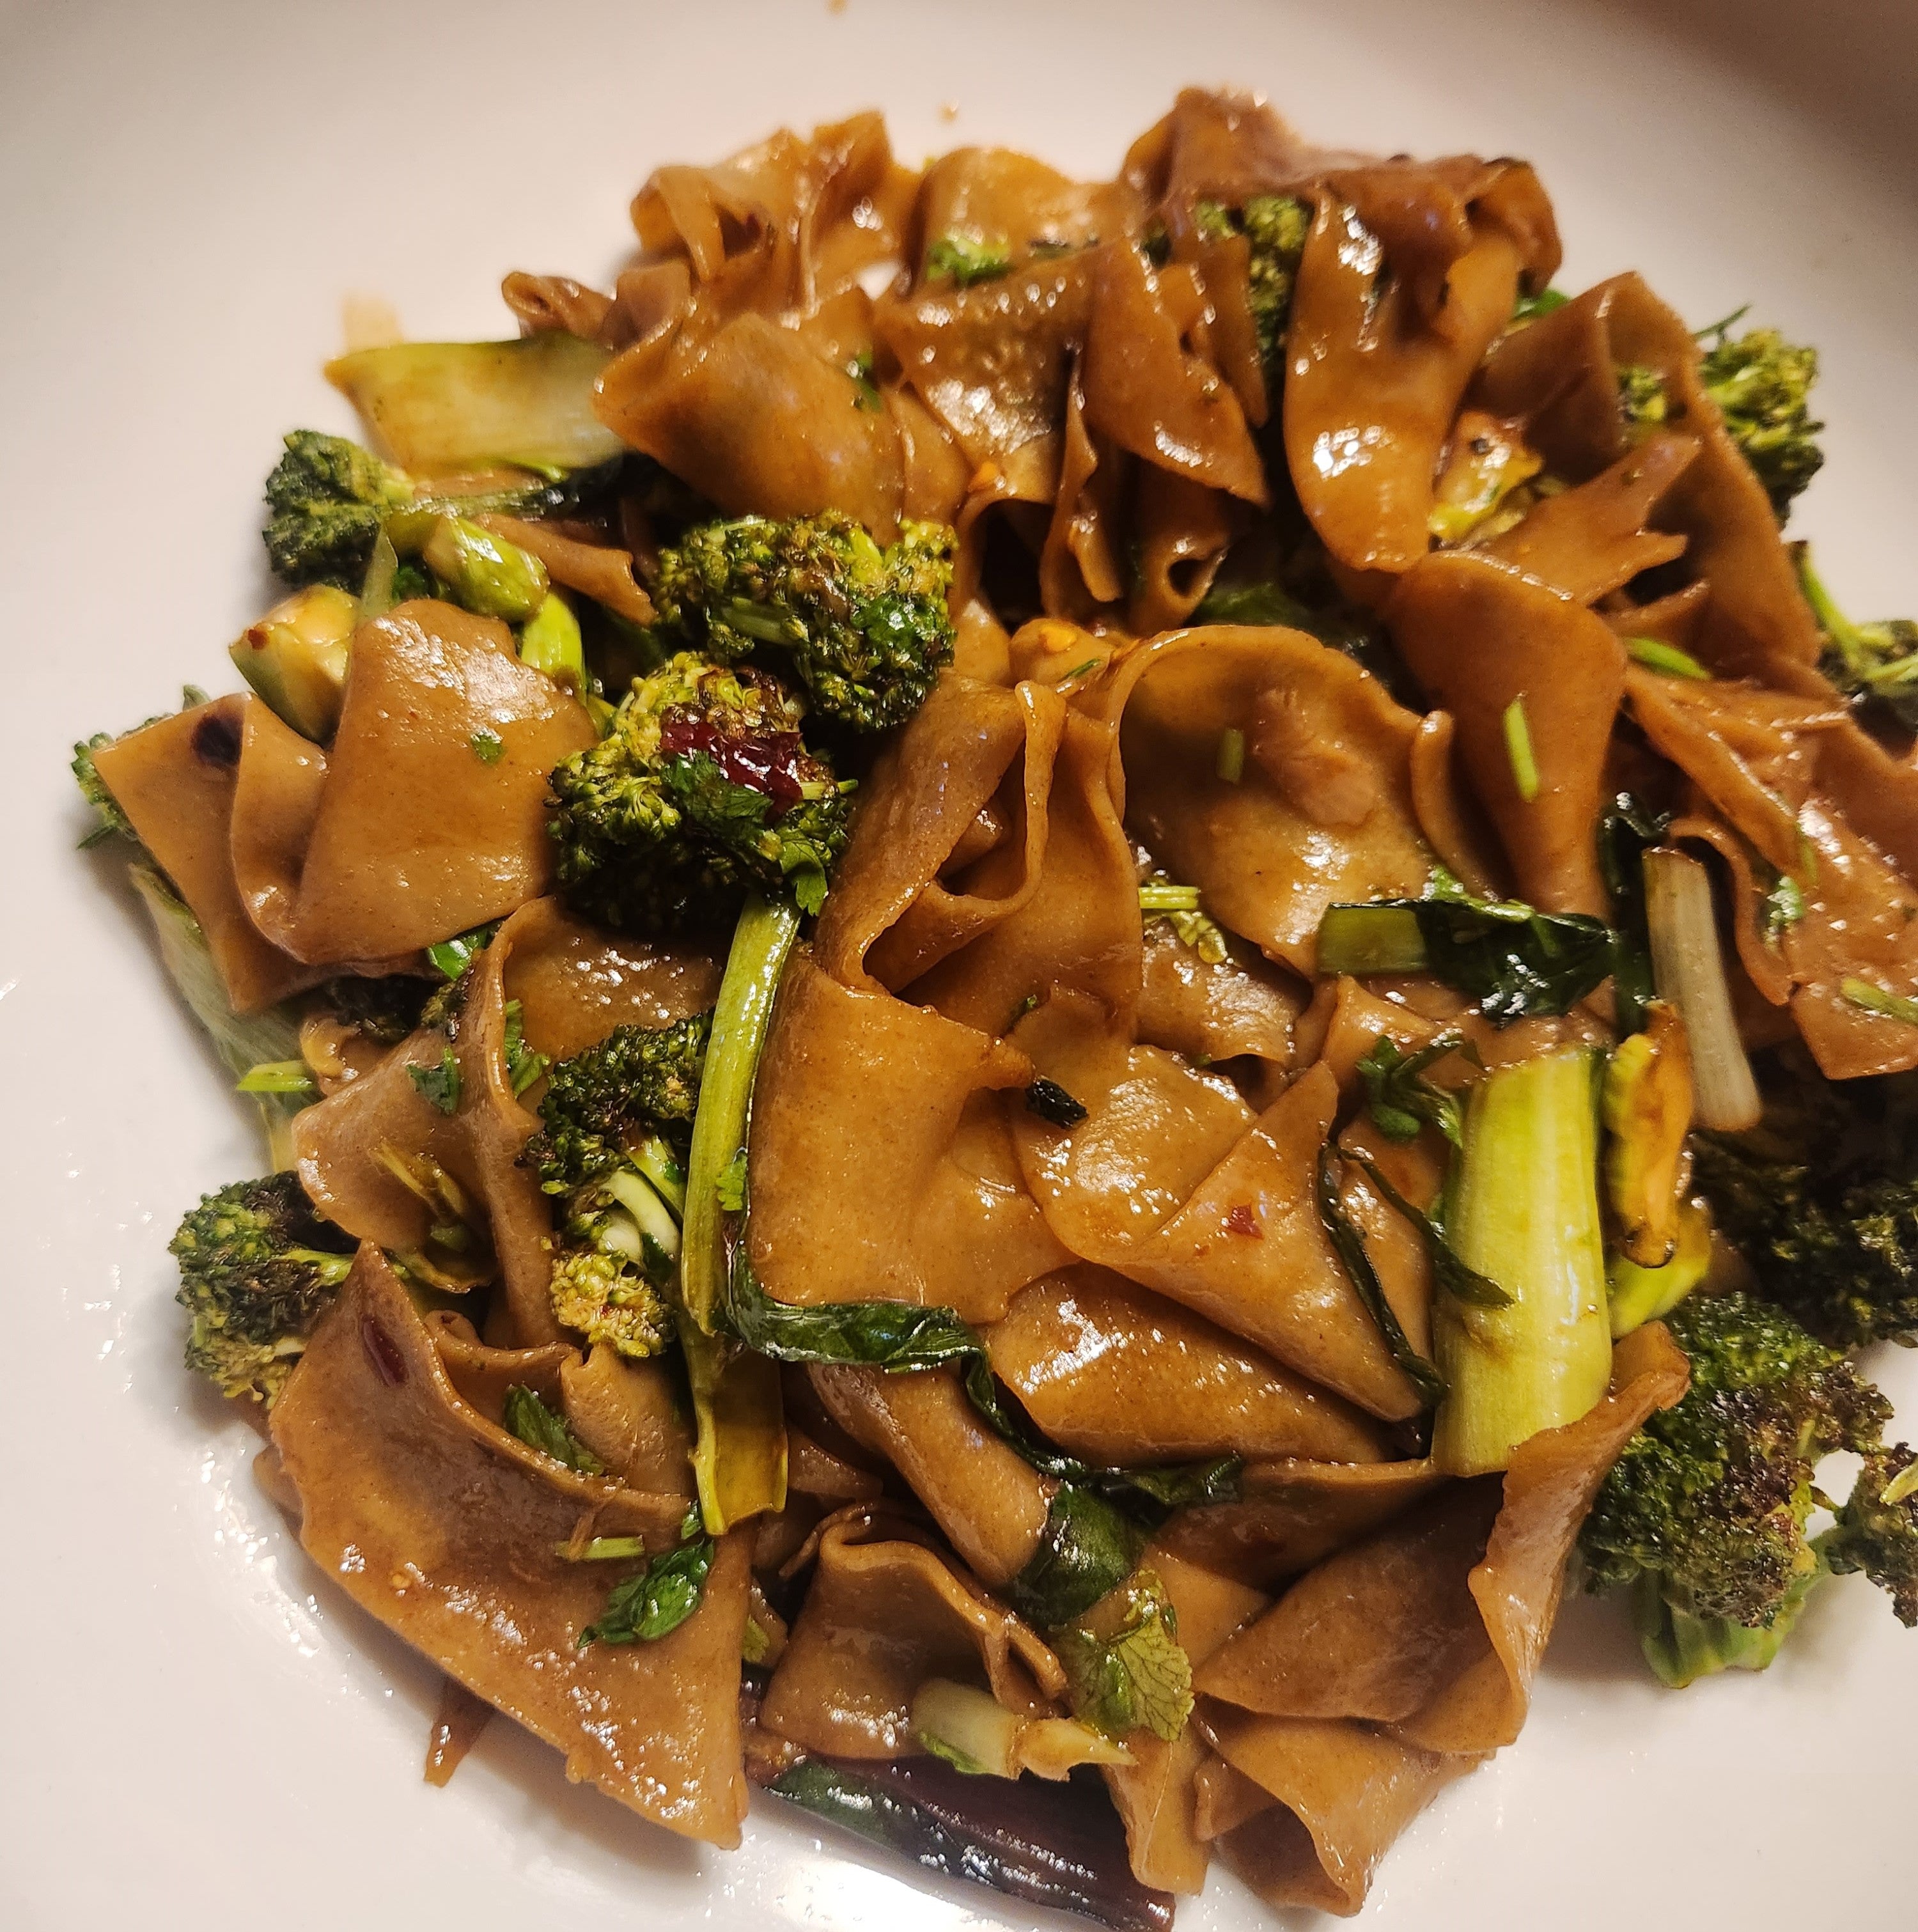 Pappardelle fresh pasta in a pad see ew thai style stir fry recipe